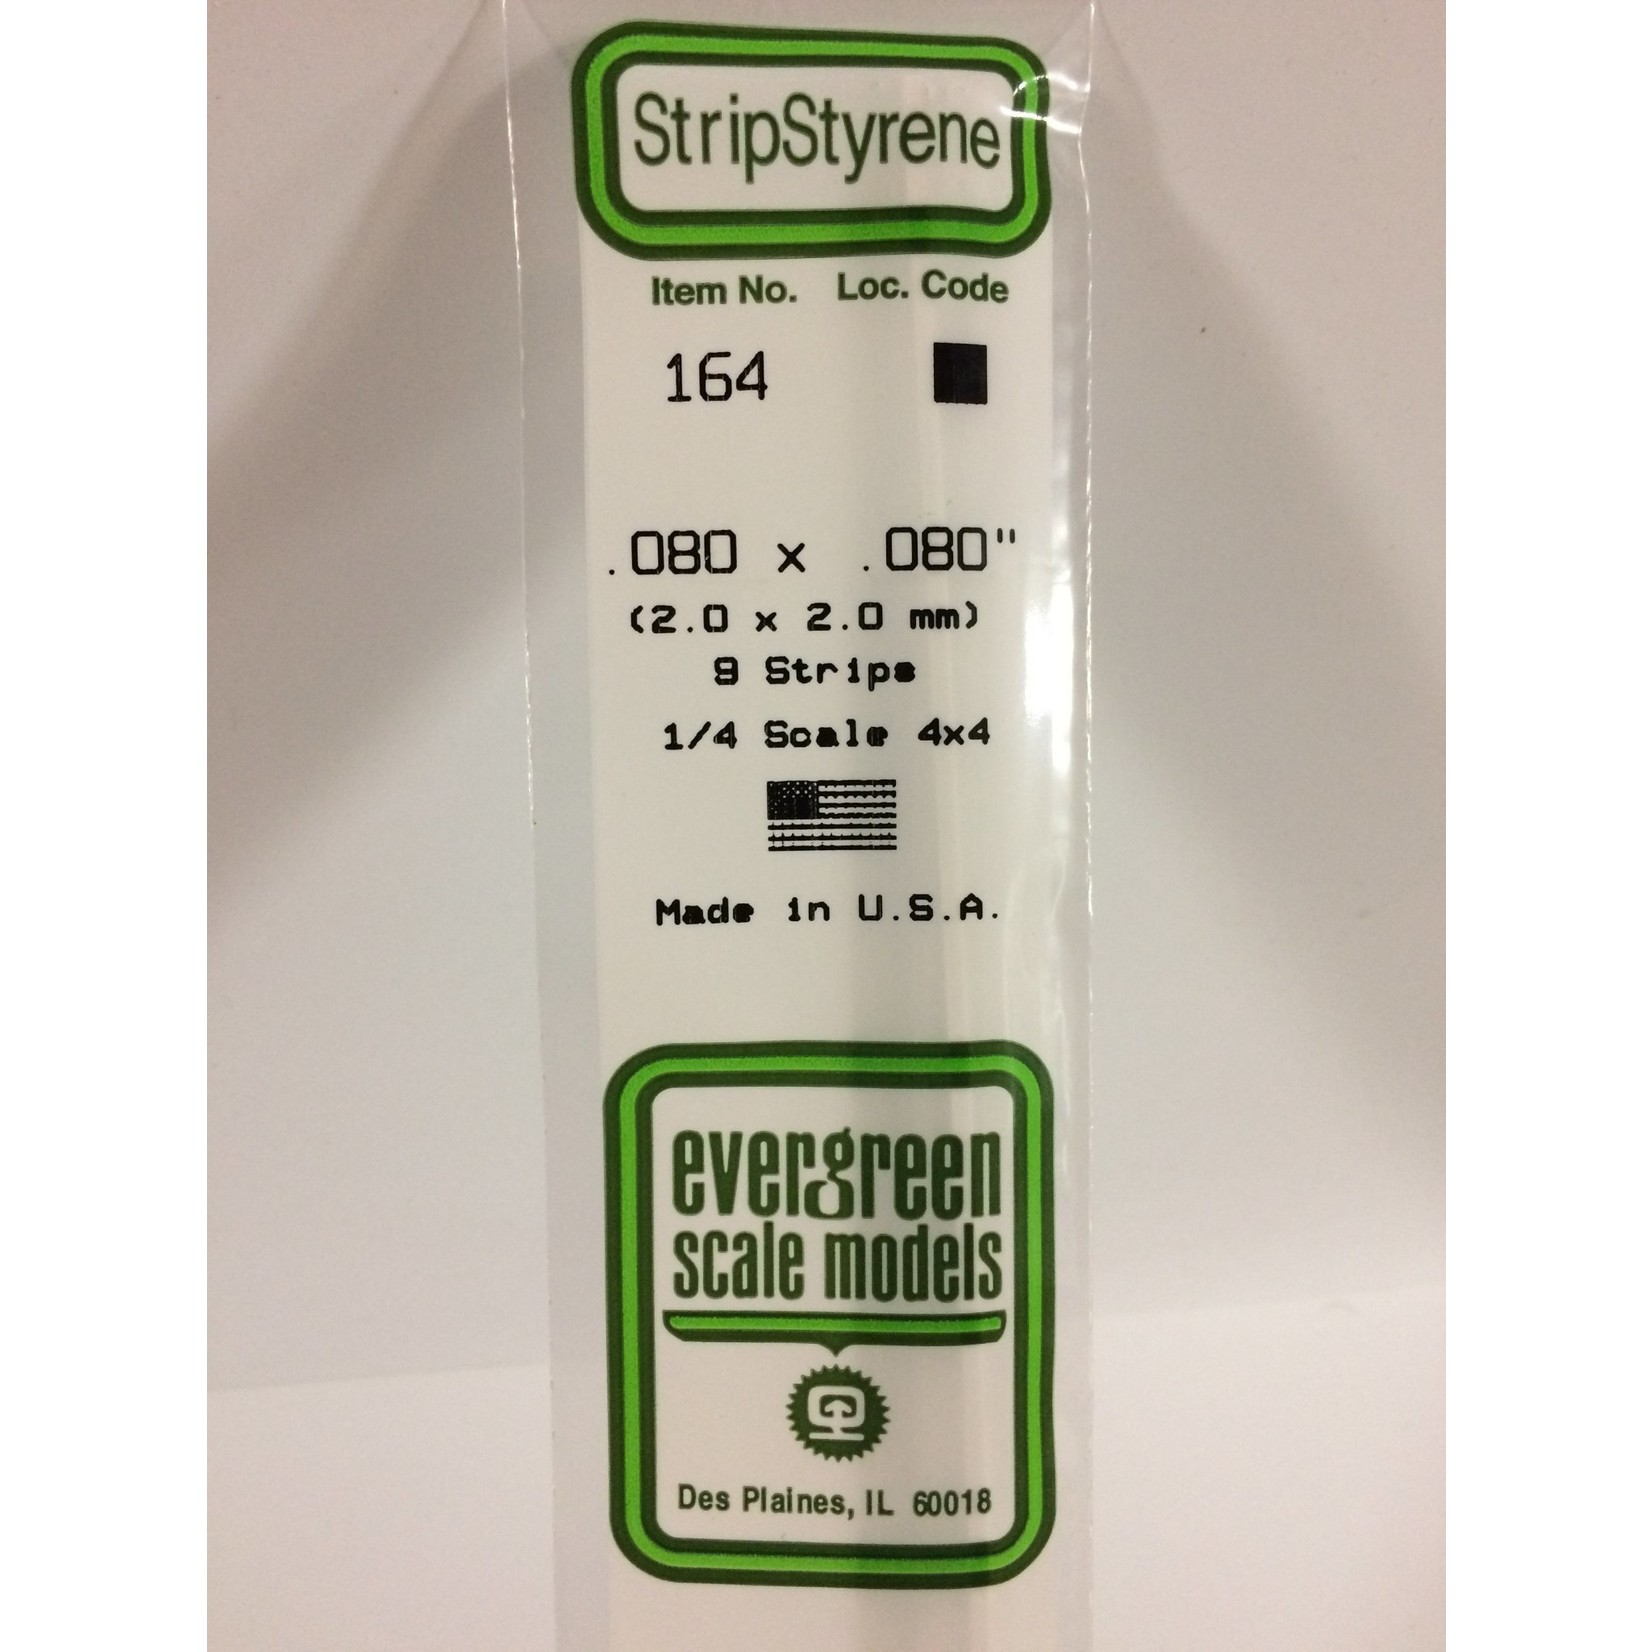 Evergreen Scale Models Evergreen 164 - .080" X .080" OPAQUE WHITE POLYSTYRENE STRIP